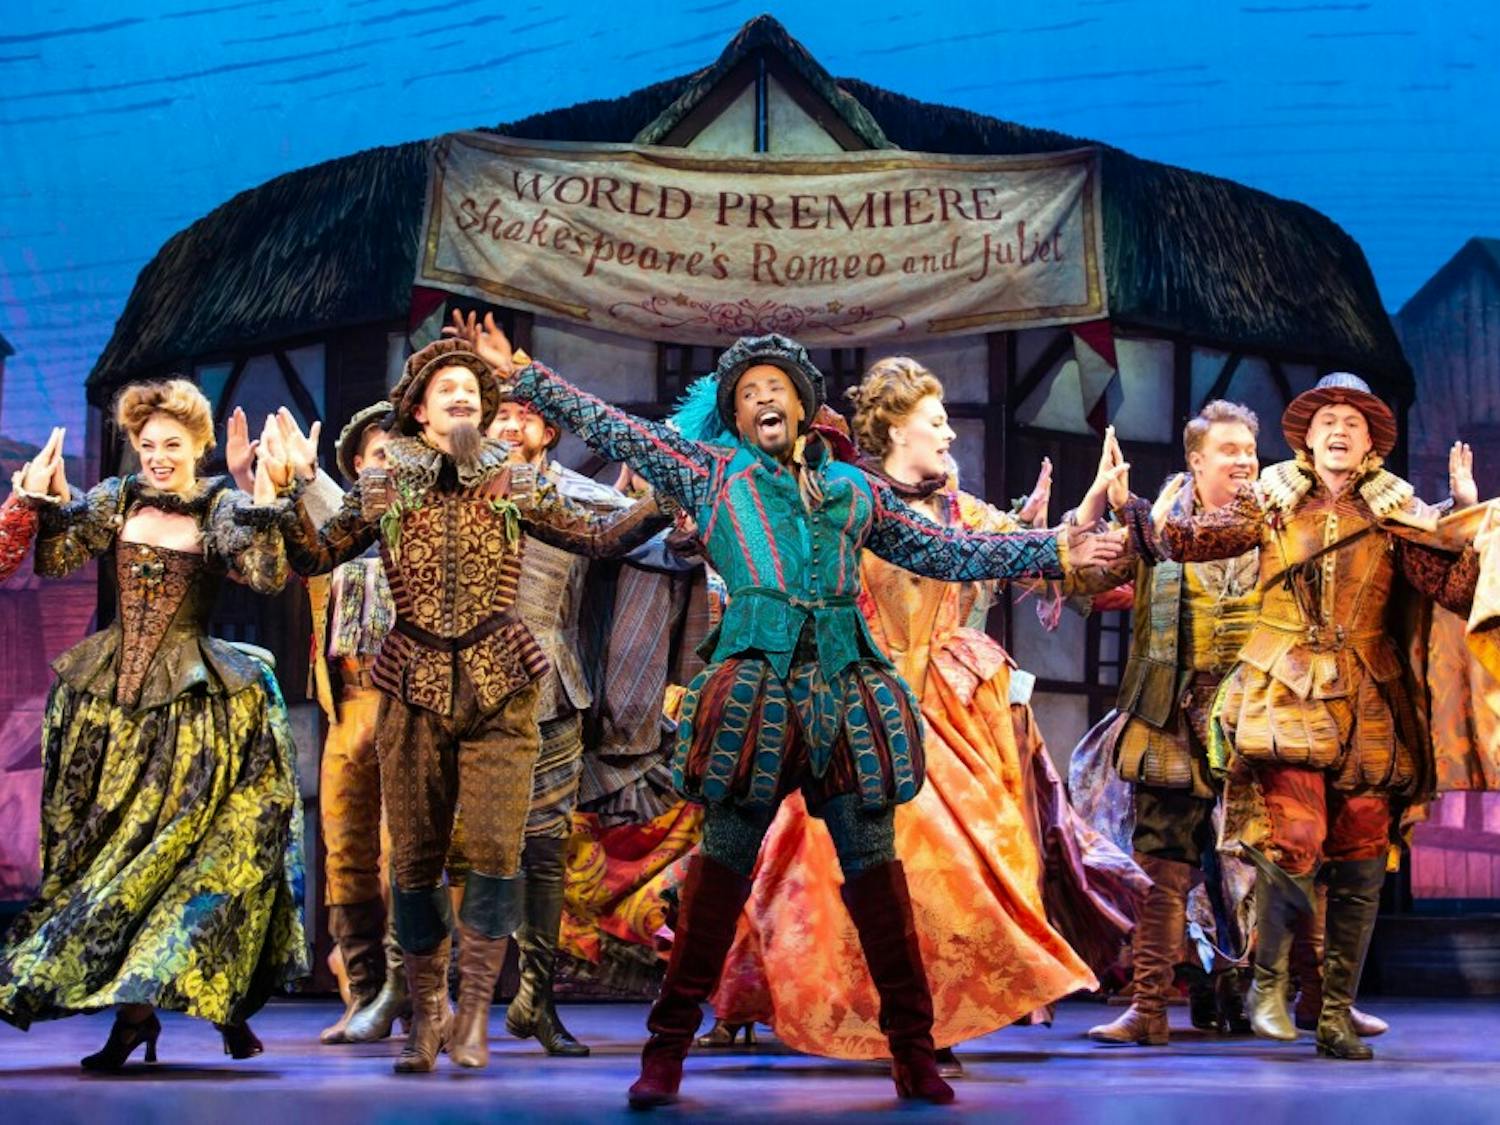 The playful Broadway musical set in Renaissance-era London centered on the plight of brothers Nick and Nigel Bottom and their struggle to become as famous and renowned as William Shakespeare.